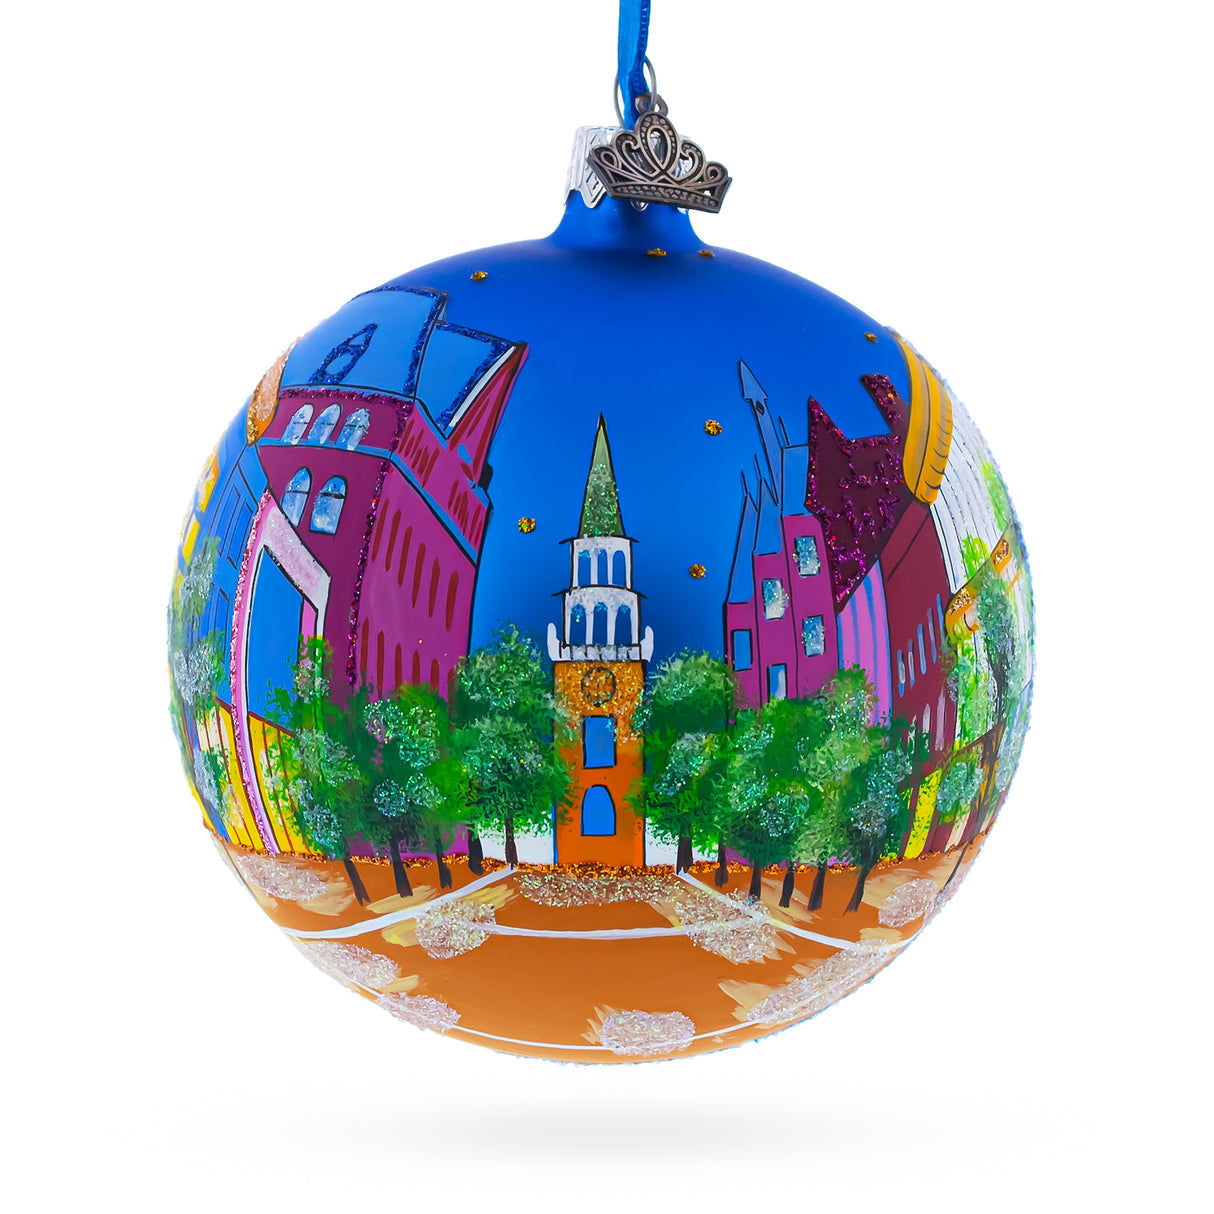 Church Street Marketplace, Burlington, Vermont, USA Glass Ball Christmas Ornament 4 Inches in Multi color, Round shape